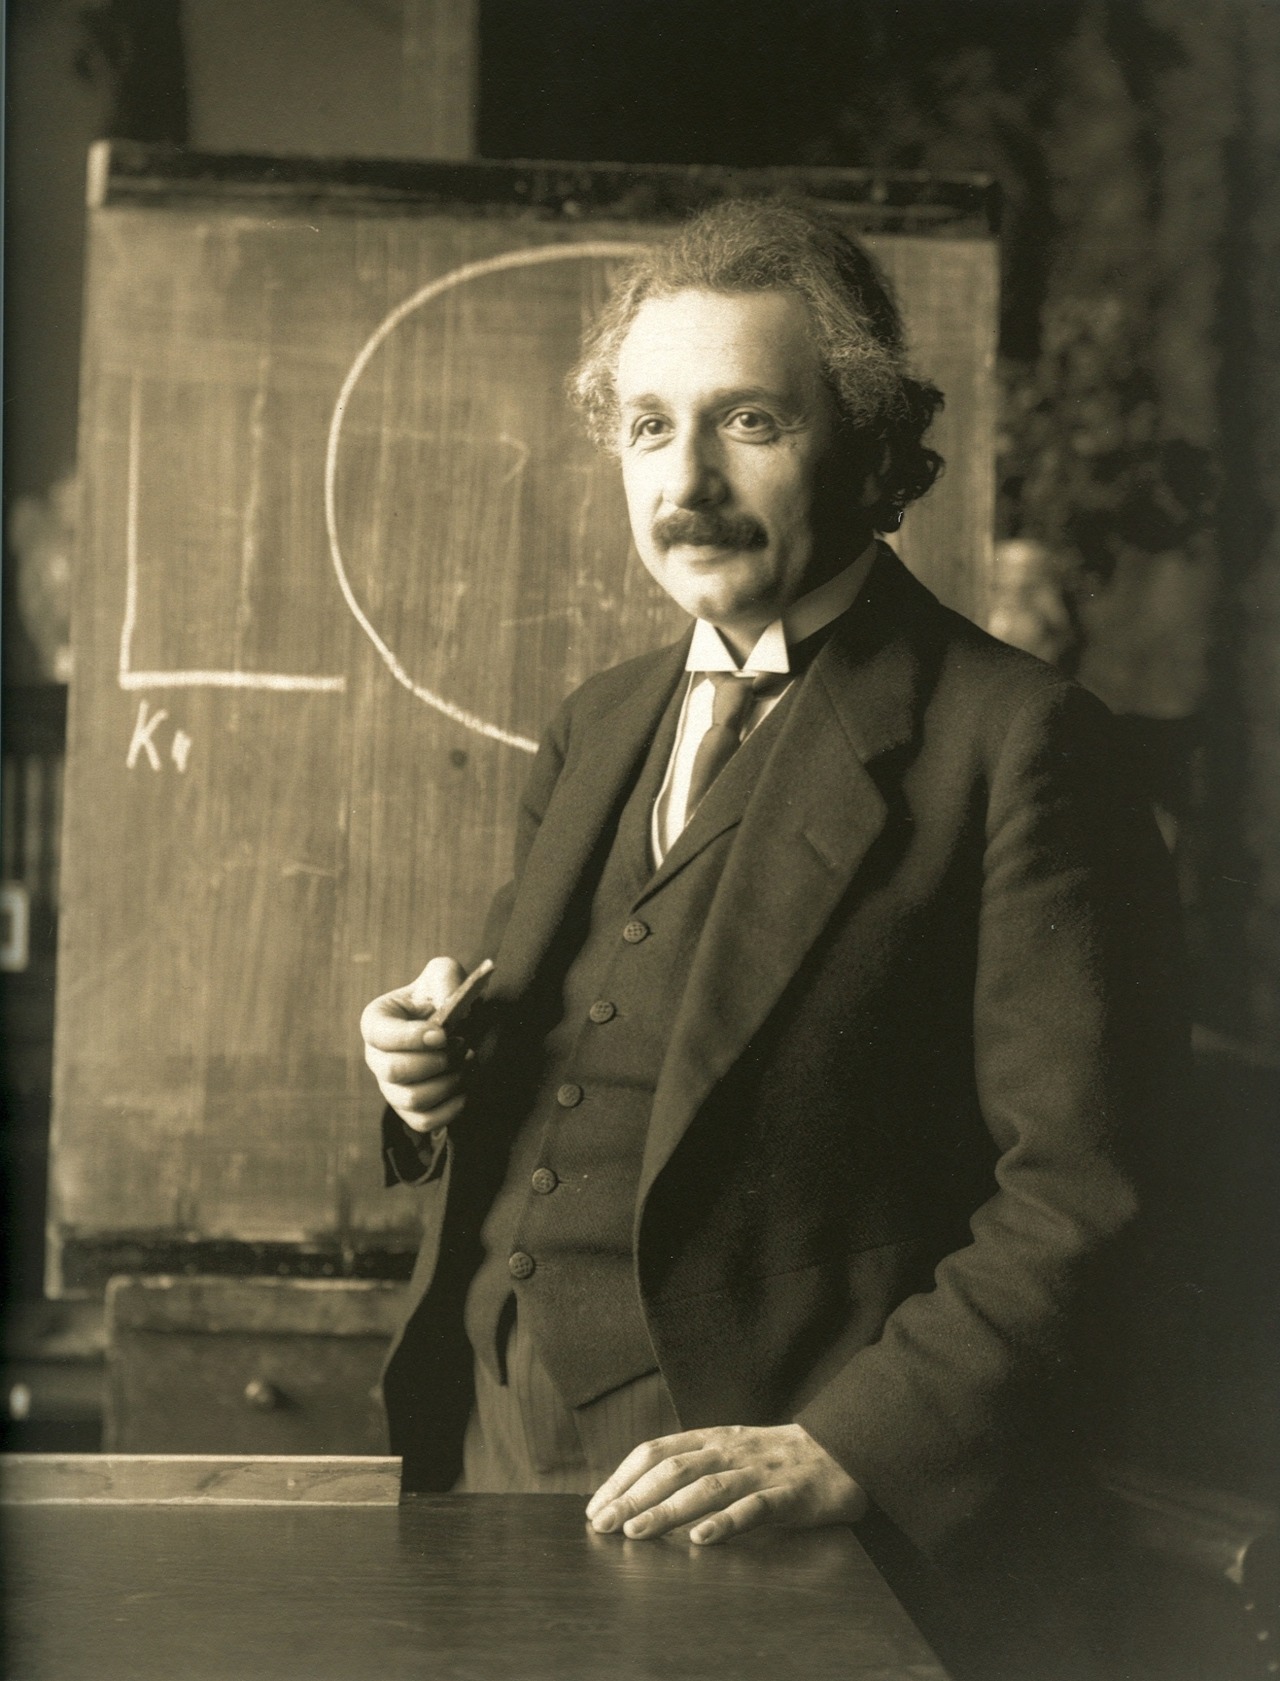 On March 14, 1879, German theoretical physicist Albert Einstein was born, who has become an iconic figure for physics as well as science of the 20th century. He is best known for his theories on special and general relativity, as well as for the...